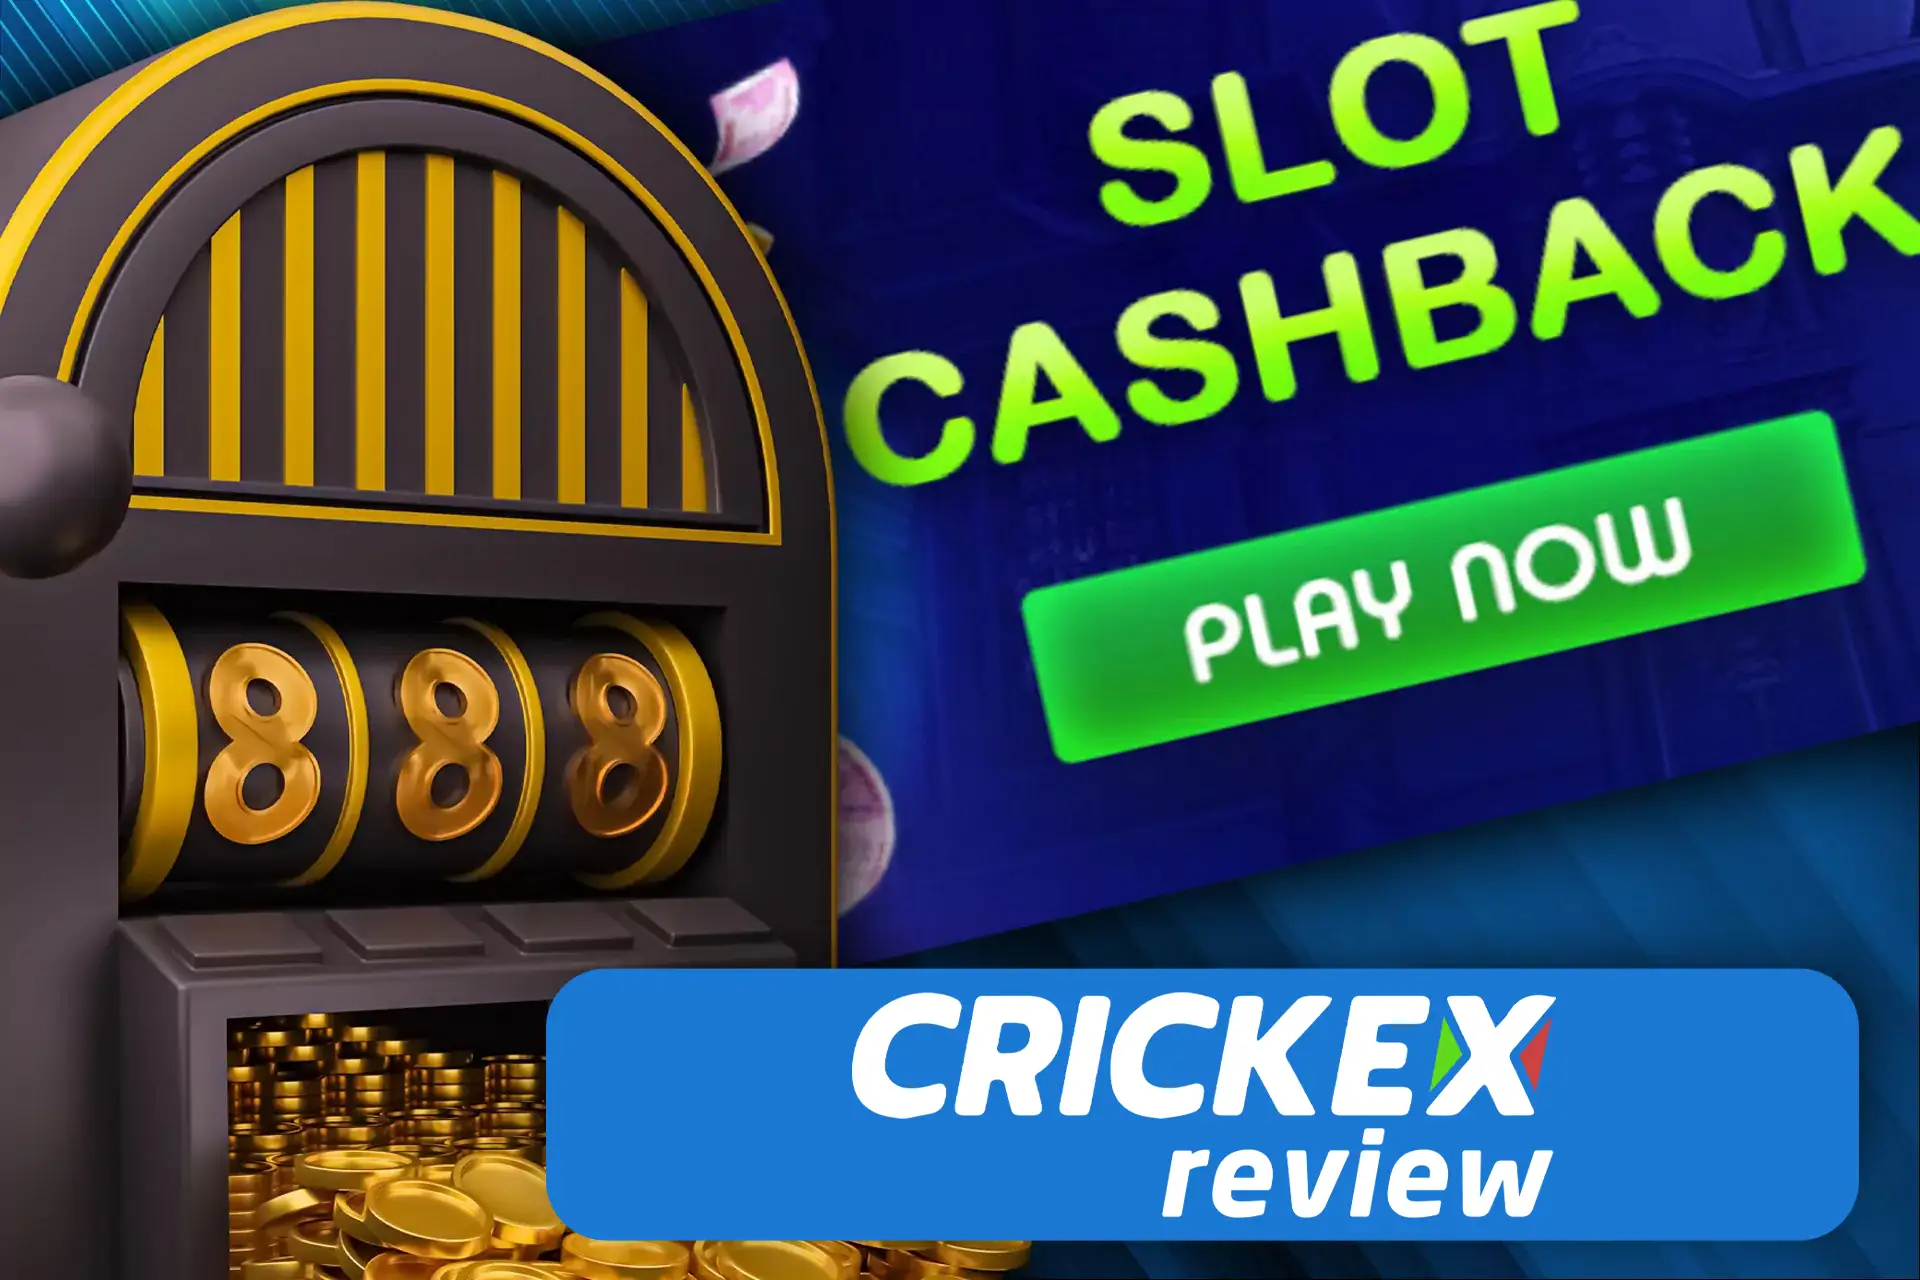 You can also receive a cashback for playing other slots.